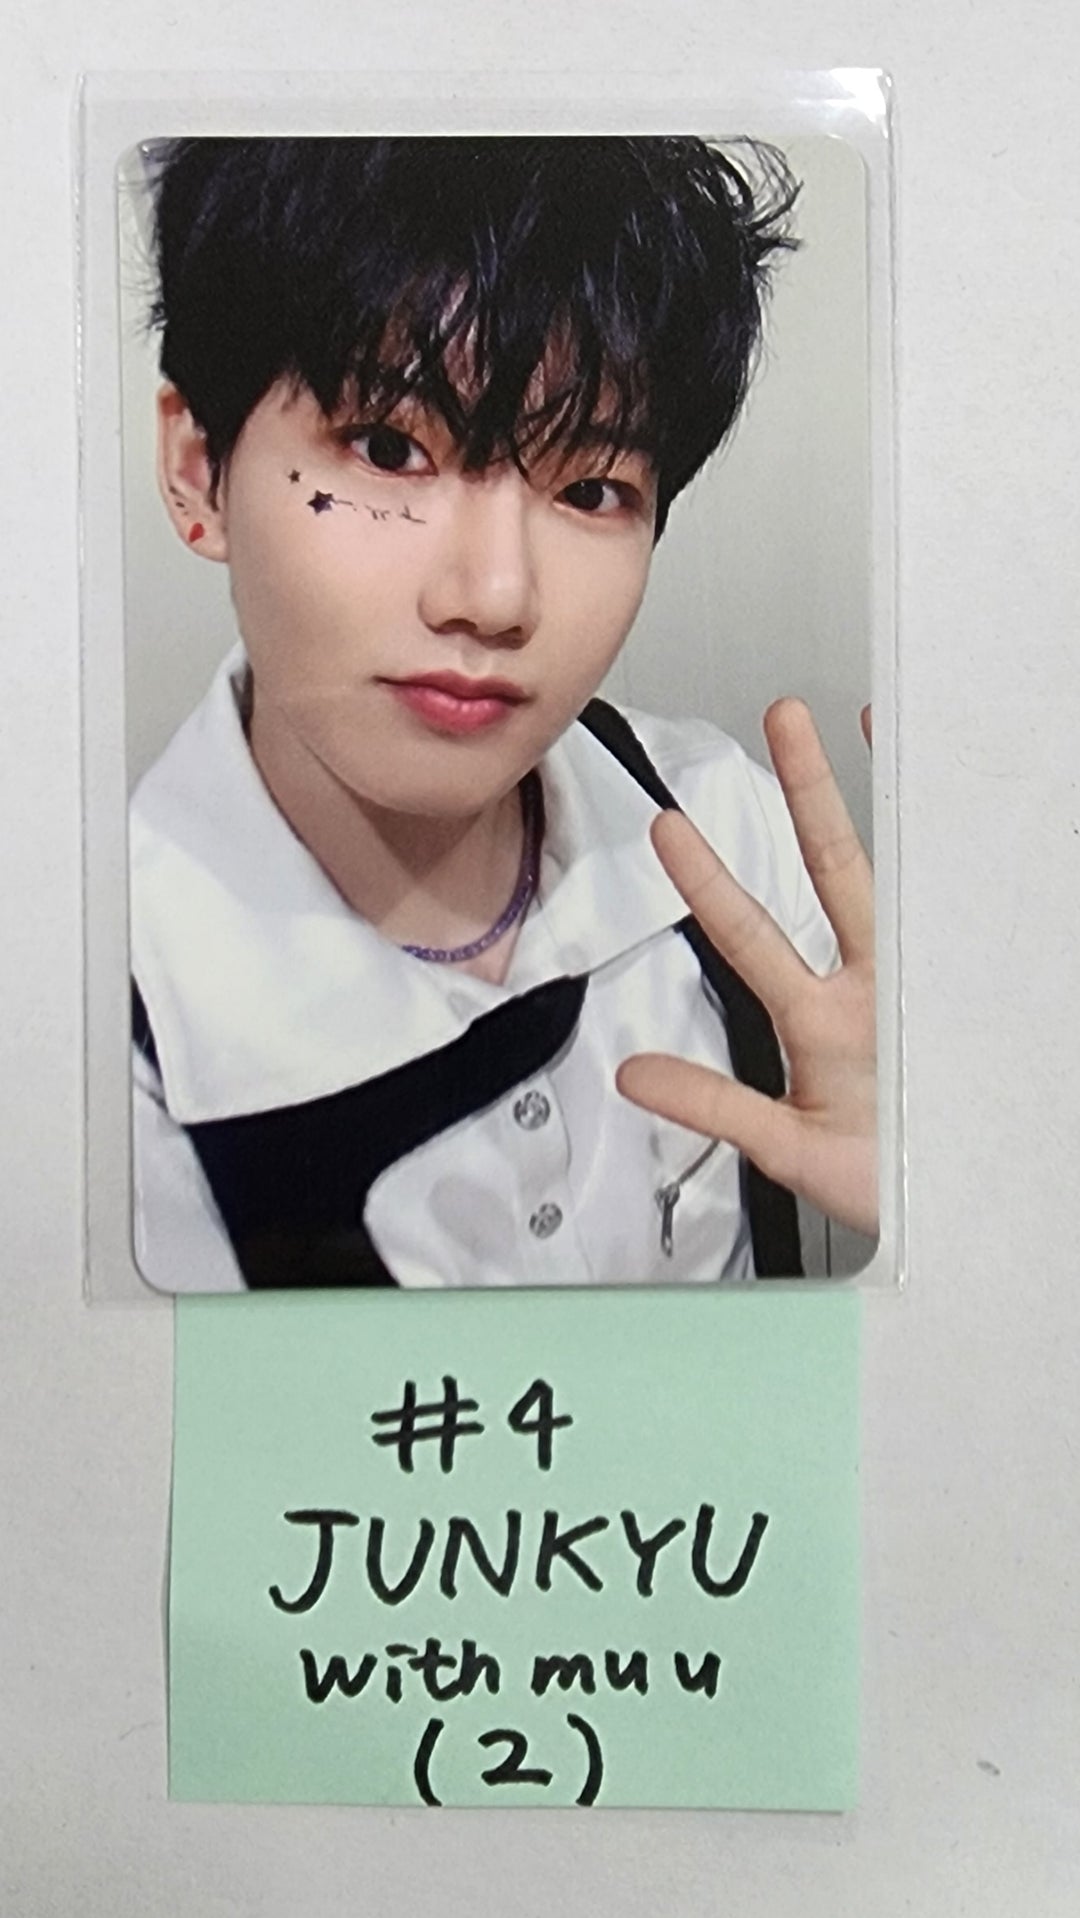 Treasure 'THE SECOND STEP : CHAPTER TWO' - Withmuu Fansign Event Photocard